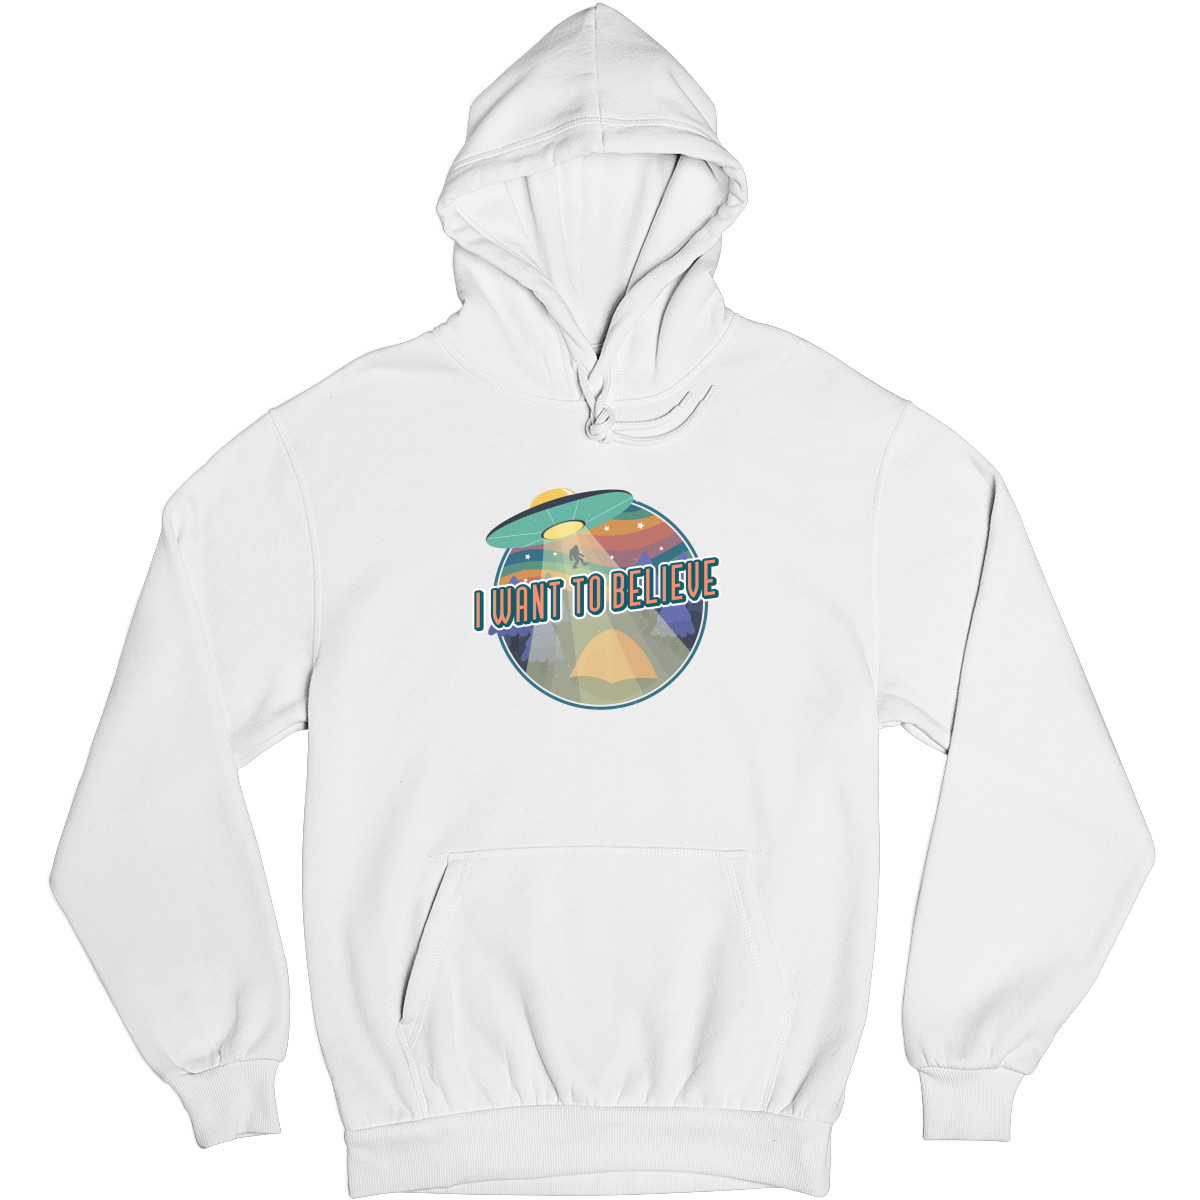 I Want To Believe Unisex Hoodie | White